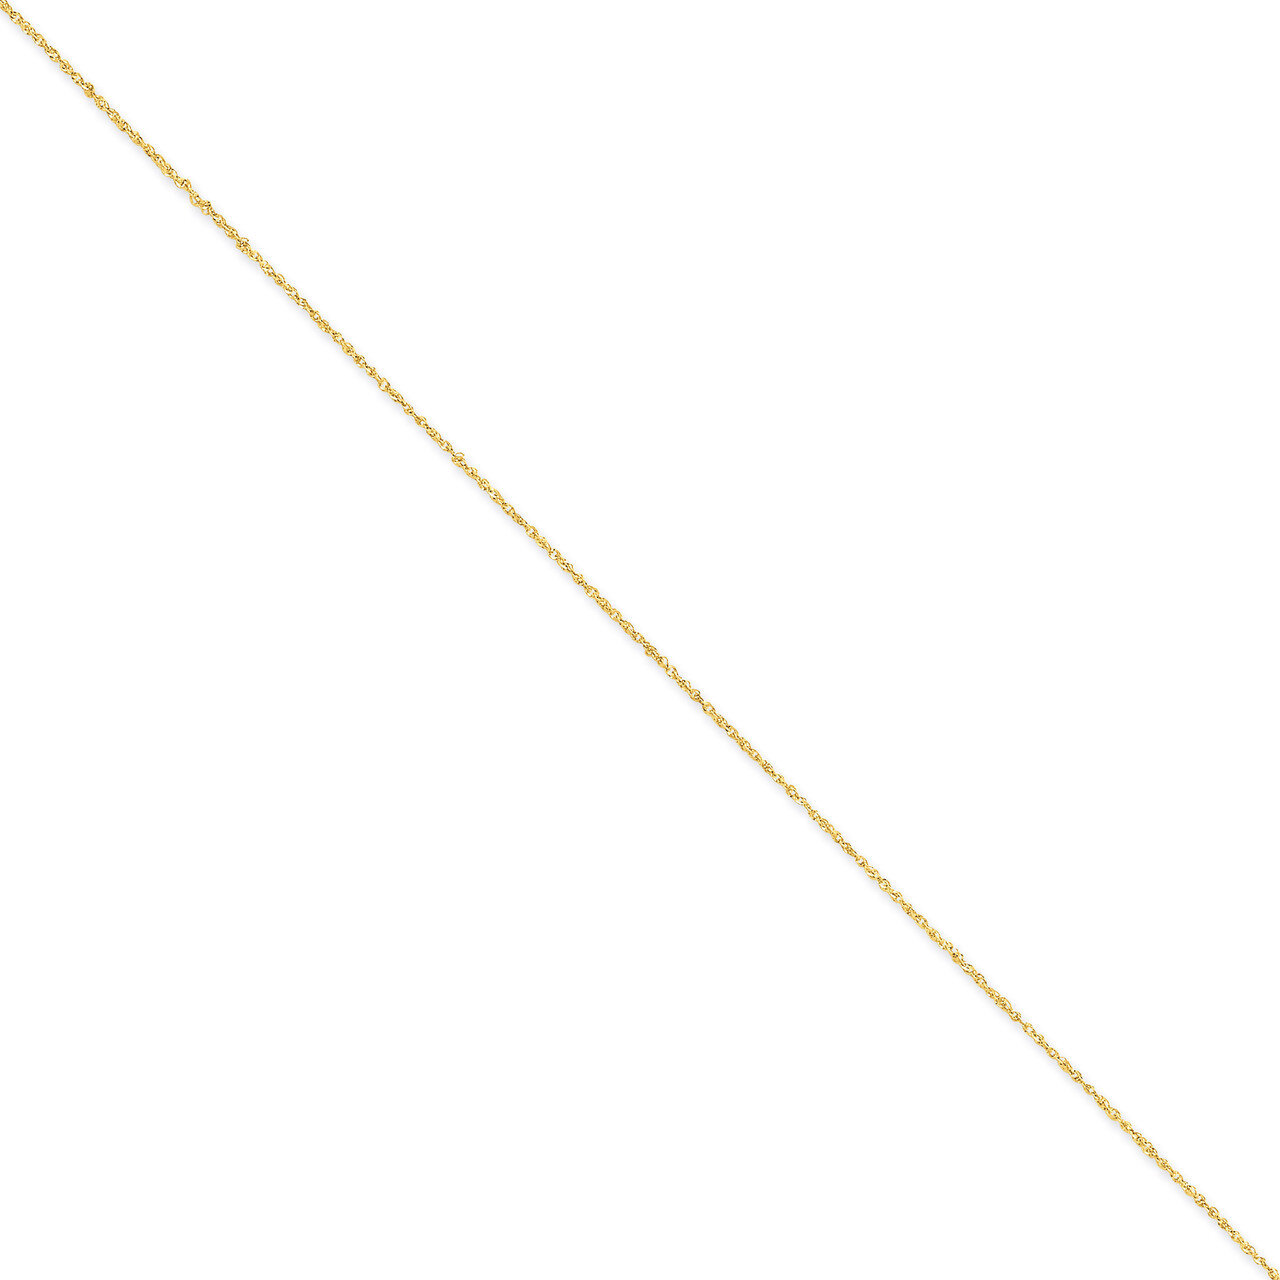 1.1mm Ropa Chain 20 Inch 14k Gold RPA020-20